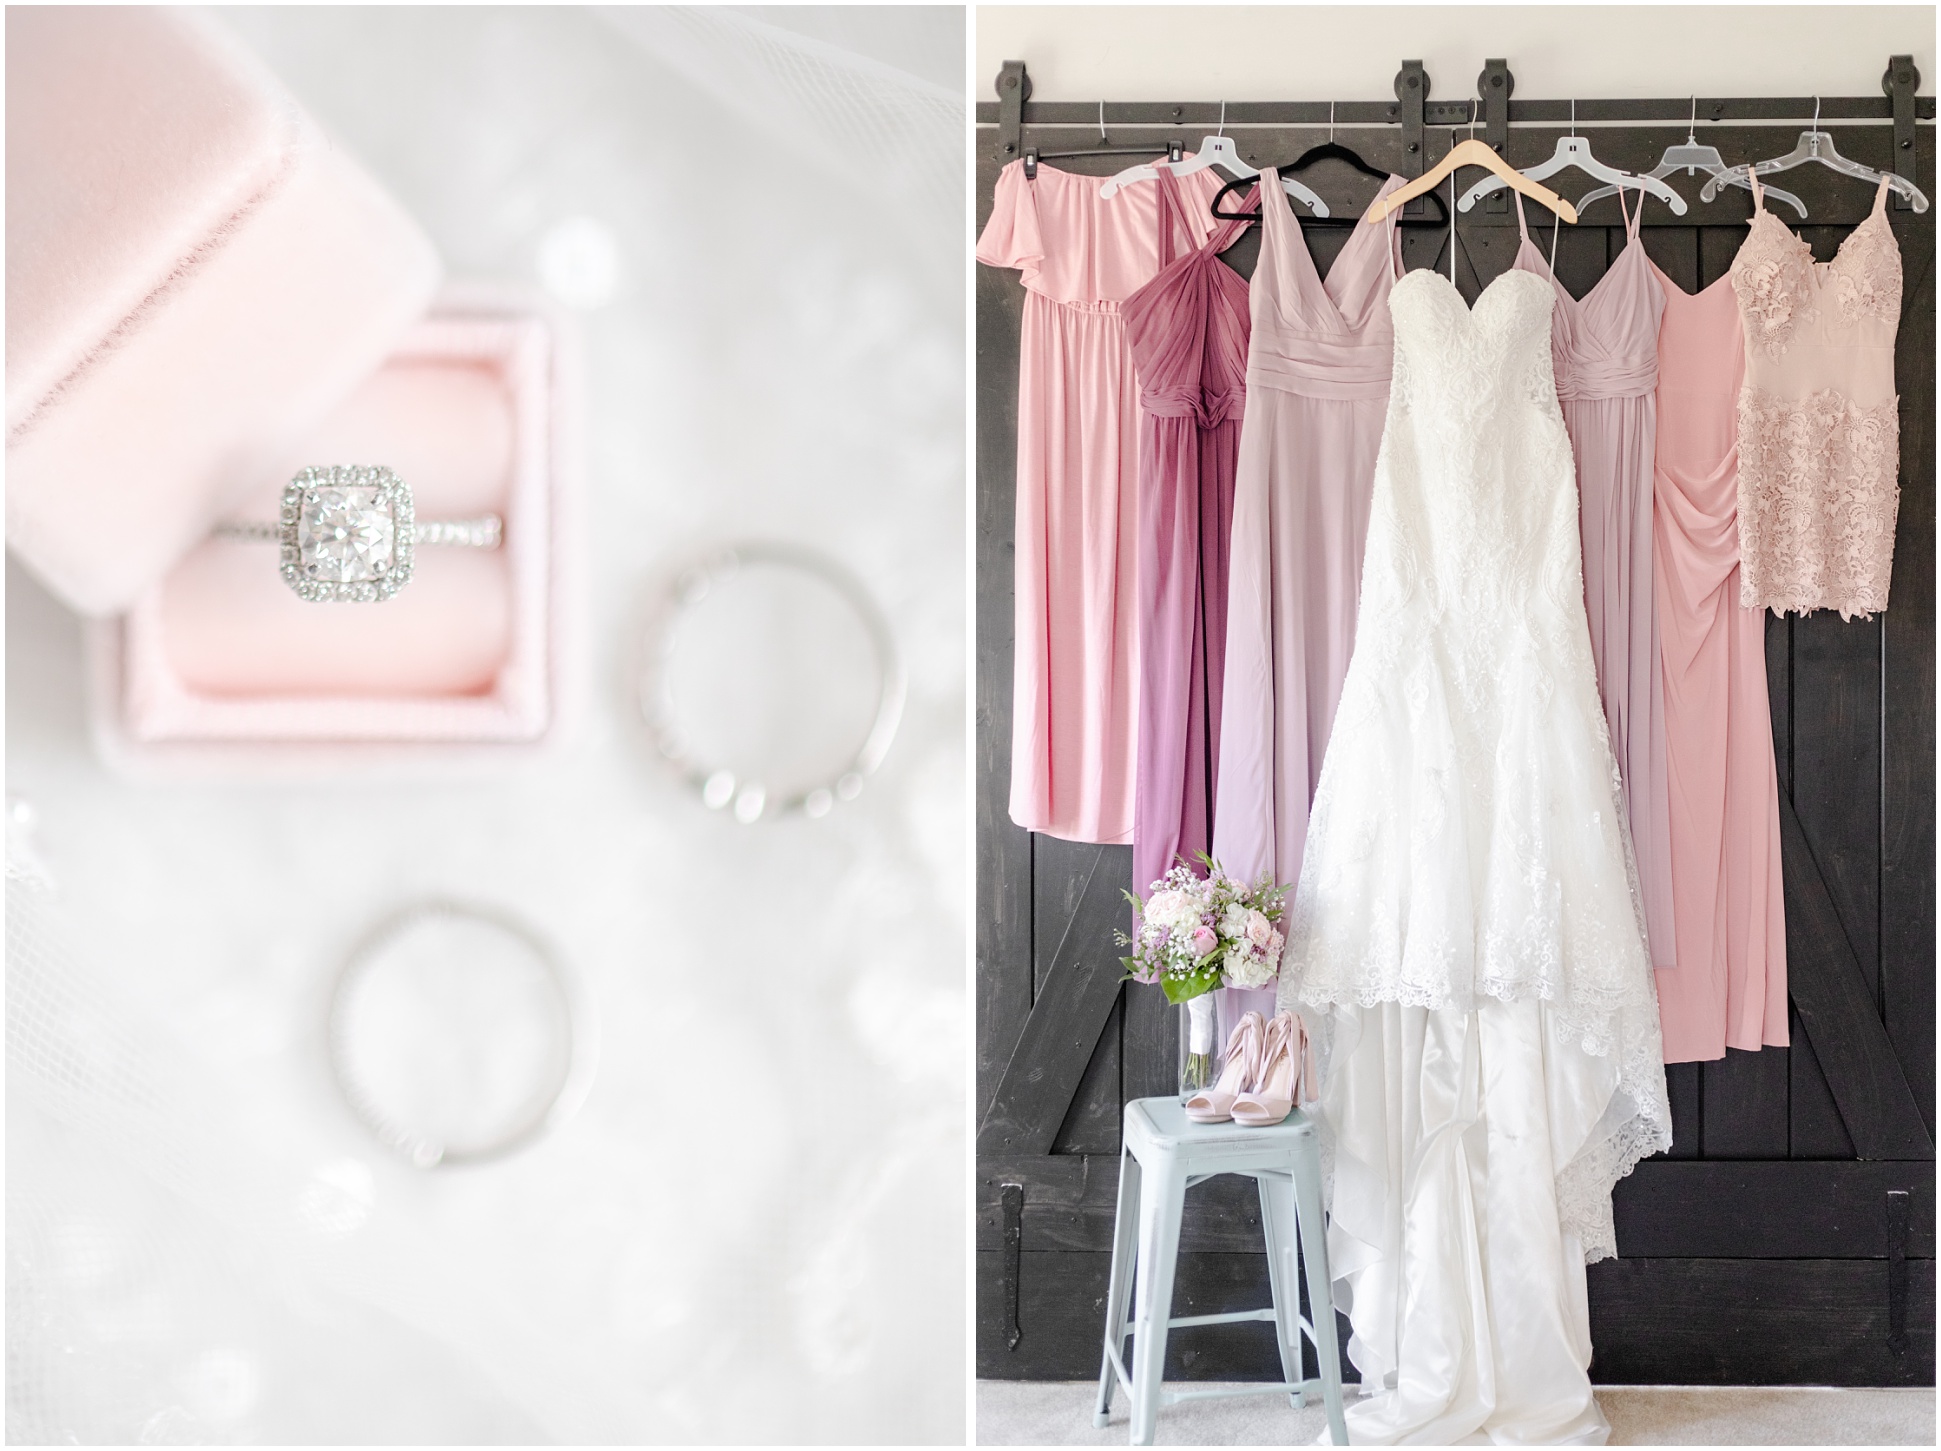 Left: Square diamond engagement ring in Mrs. Box, Right: bridesmaids dresses in different styles and shades of pink